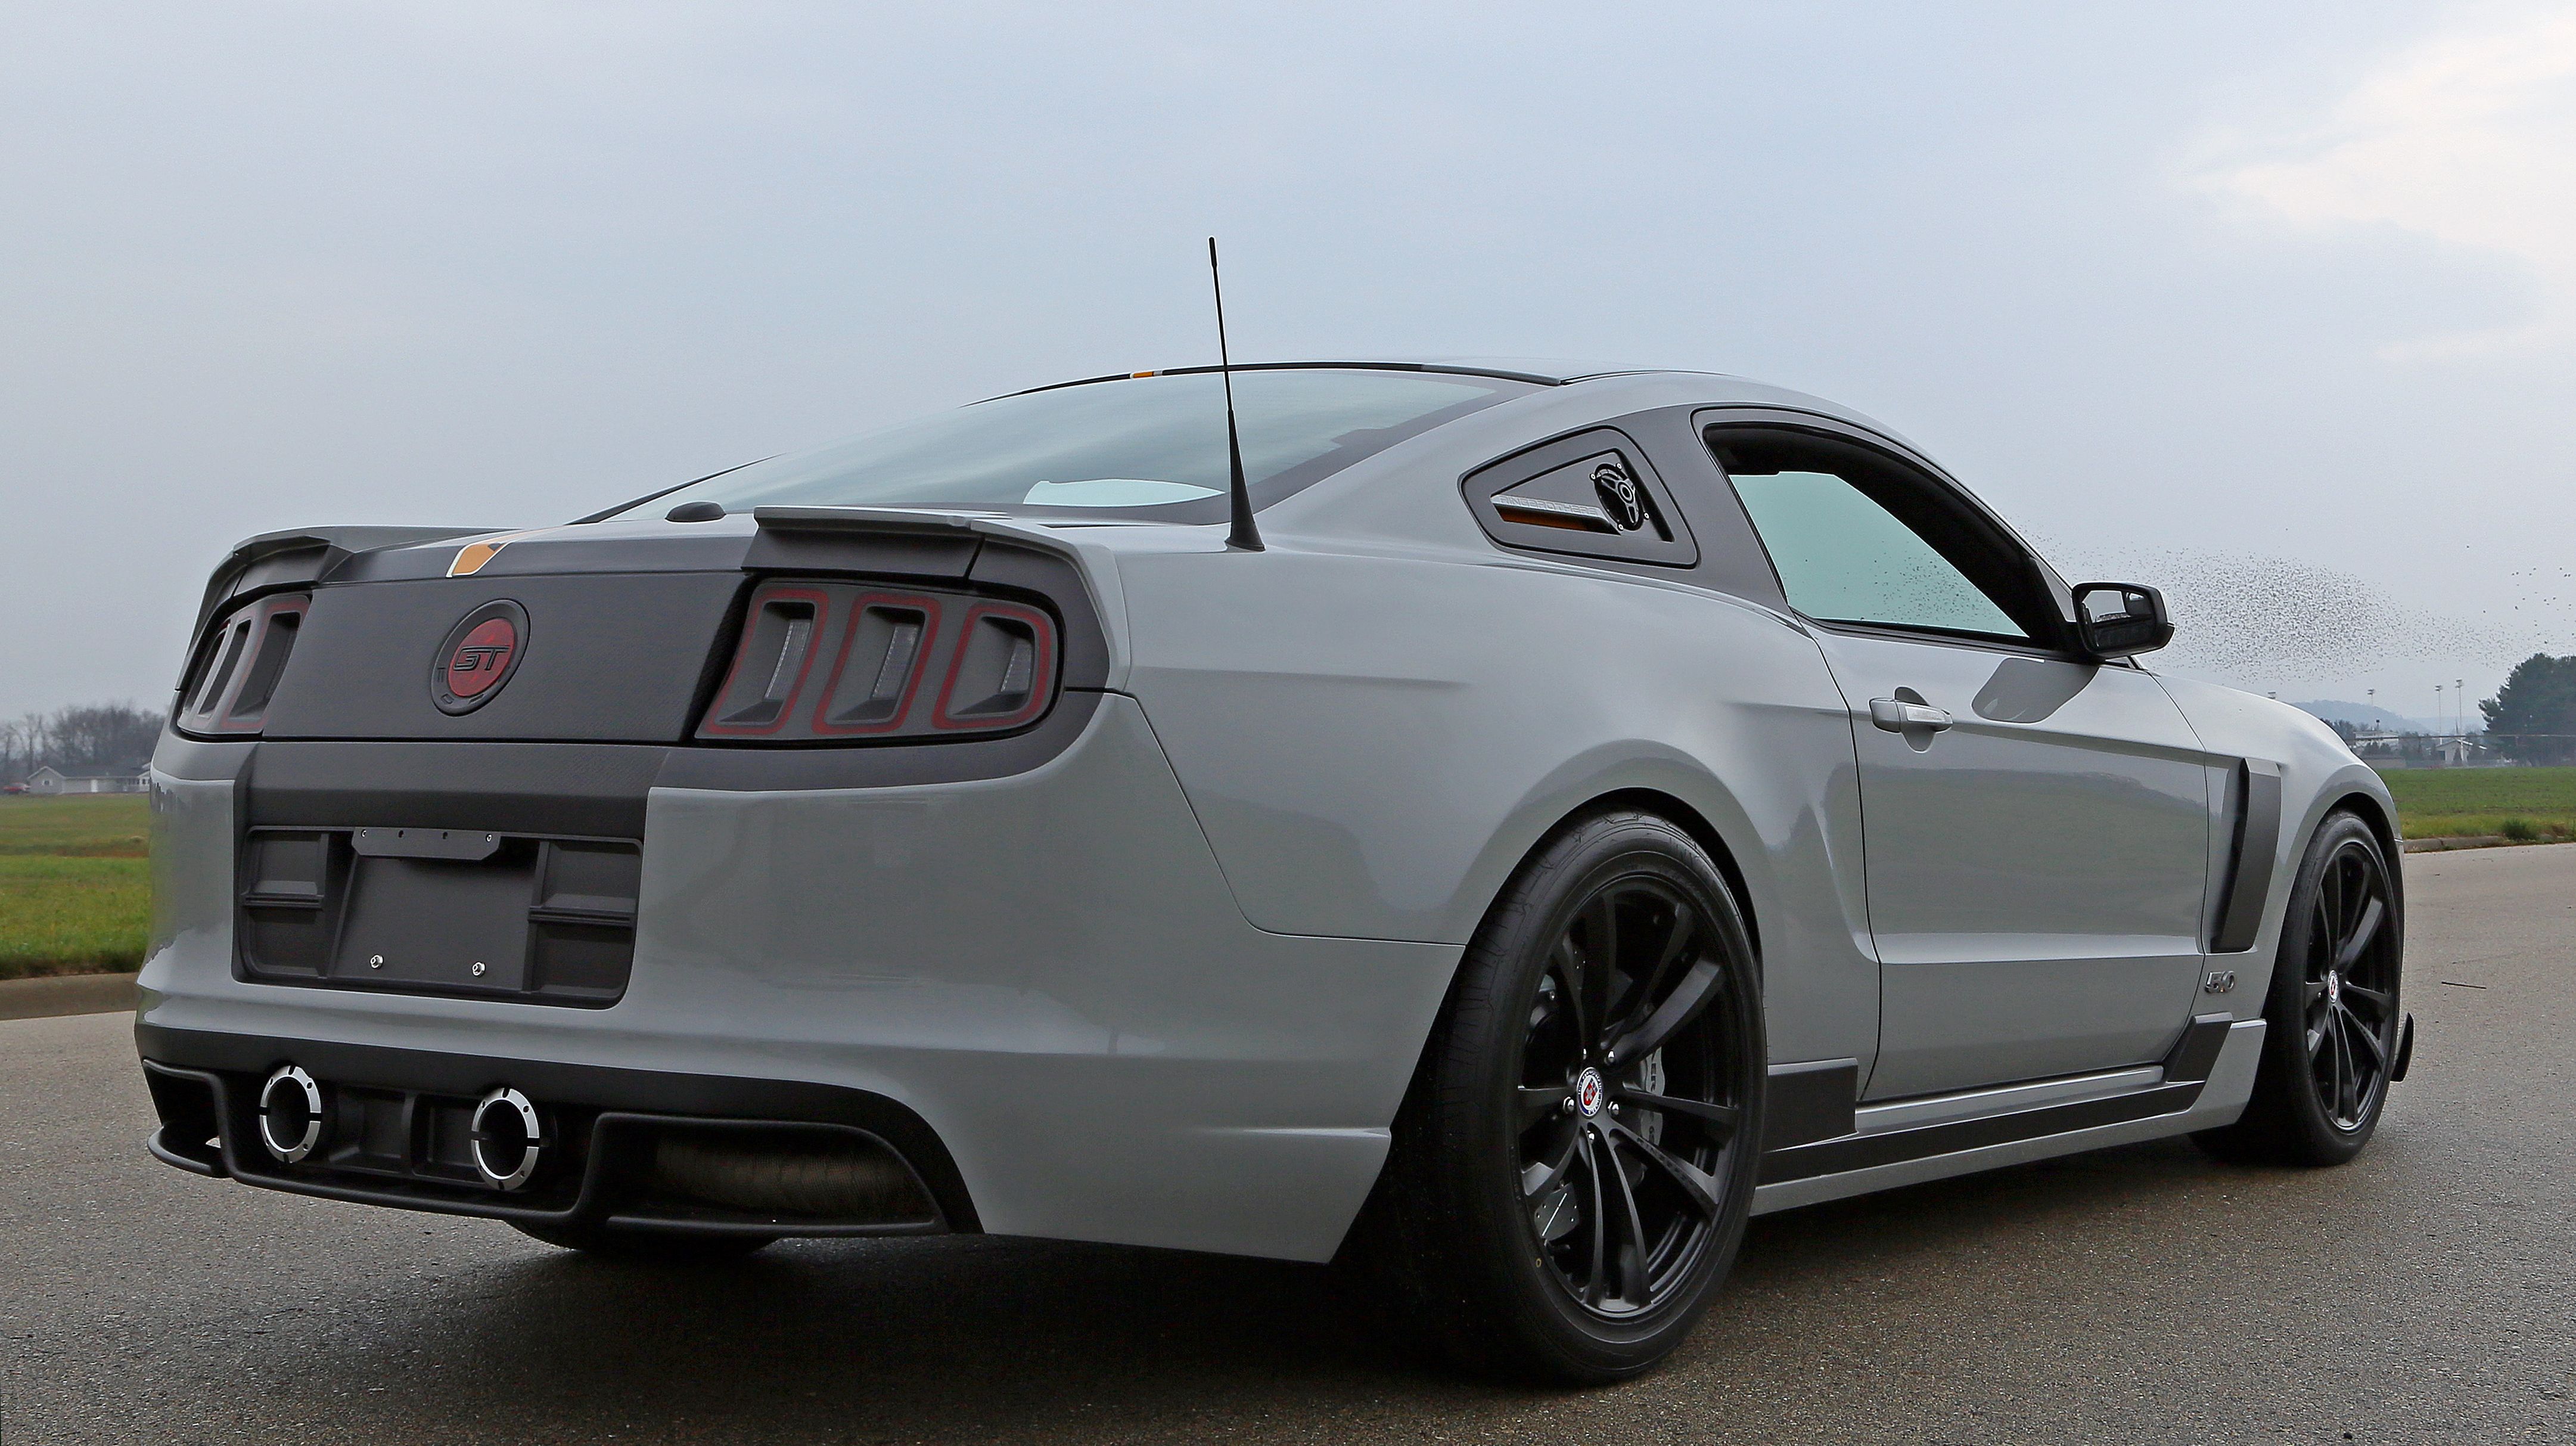 2013 Ford Mustang Switchback by Ringbrothers